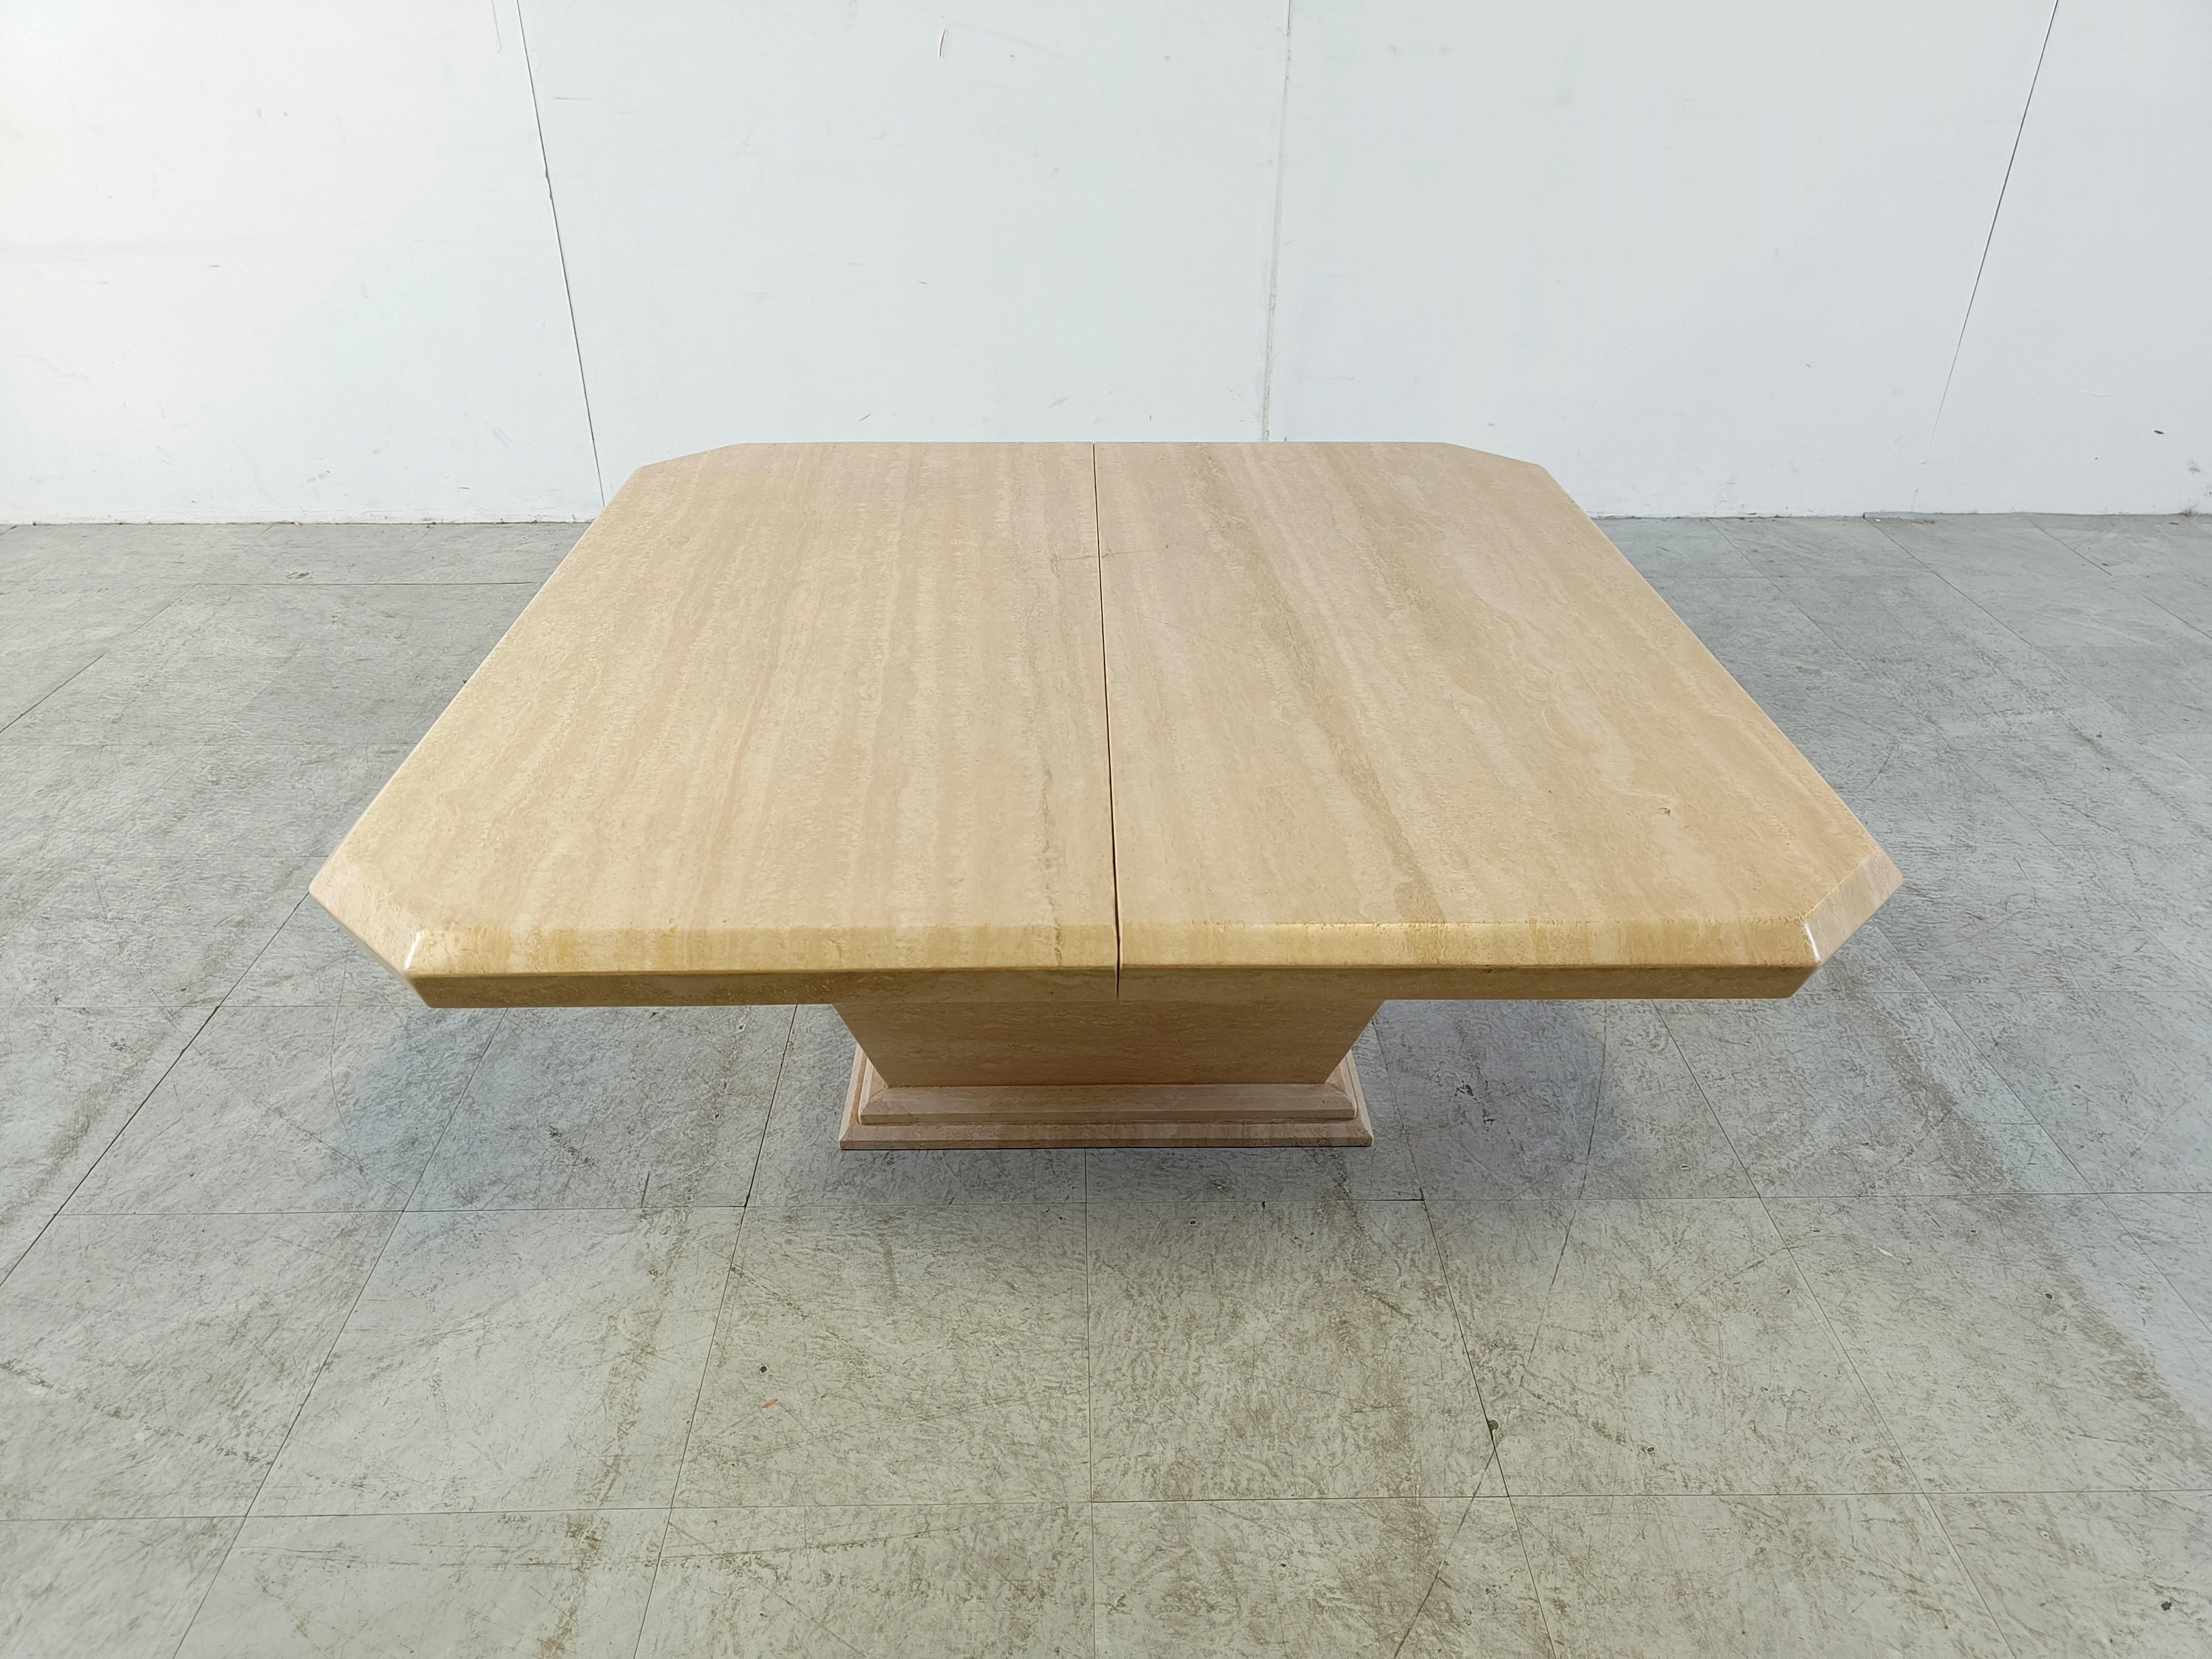 Vintage travertine hidden bar coffee table.

The two table tops slide open to reveal a storage space.

Elegant shaped base and top.

Beautiful natural colored travertine.

Good condition.

1970s - Italy

Dimensions:
Height: 45cm/17.71